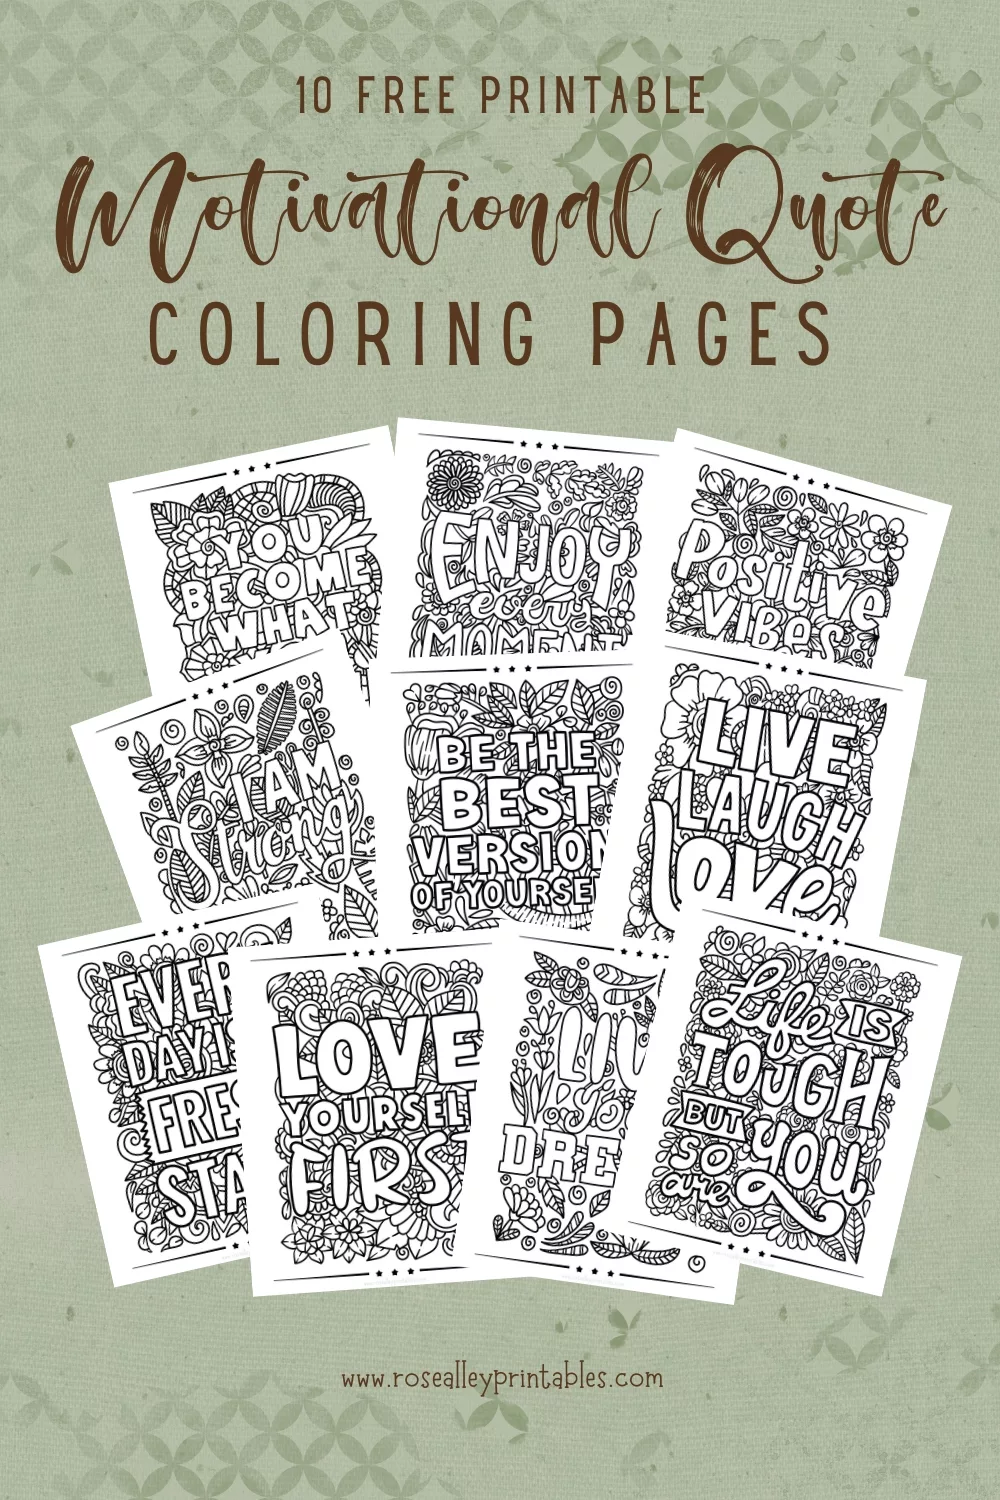 Free printable motivational quote coloring pages